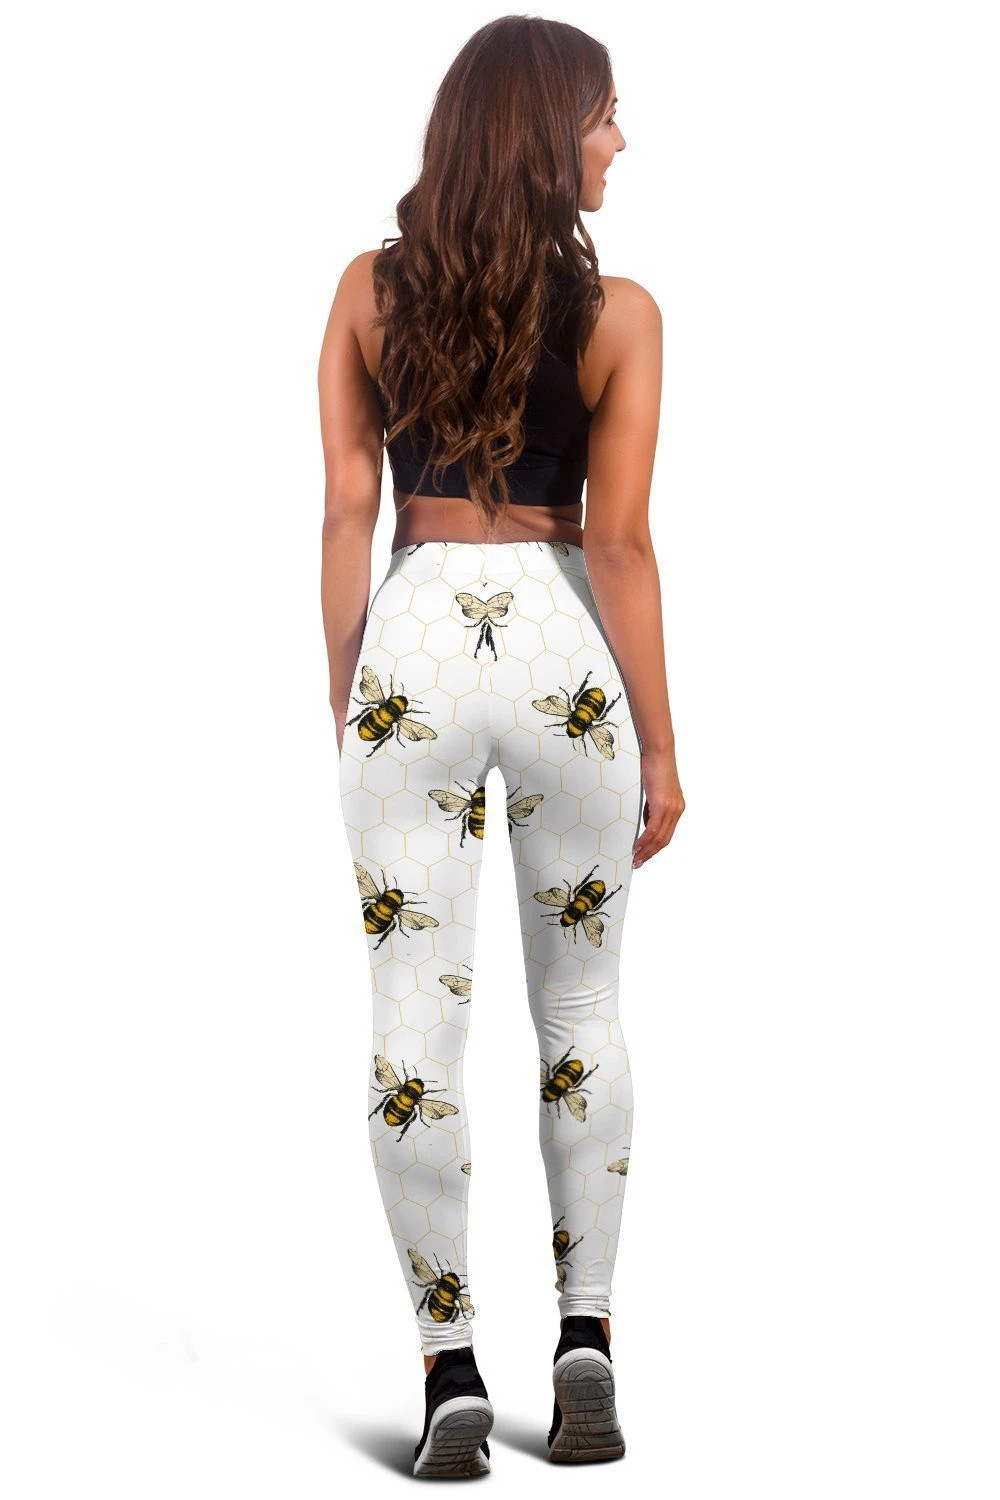 3D All Over Print Many Bee Legging